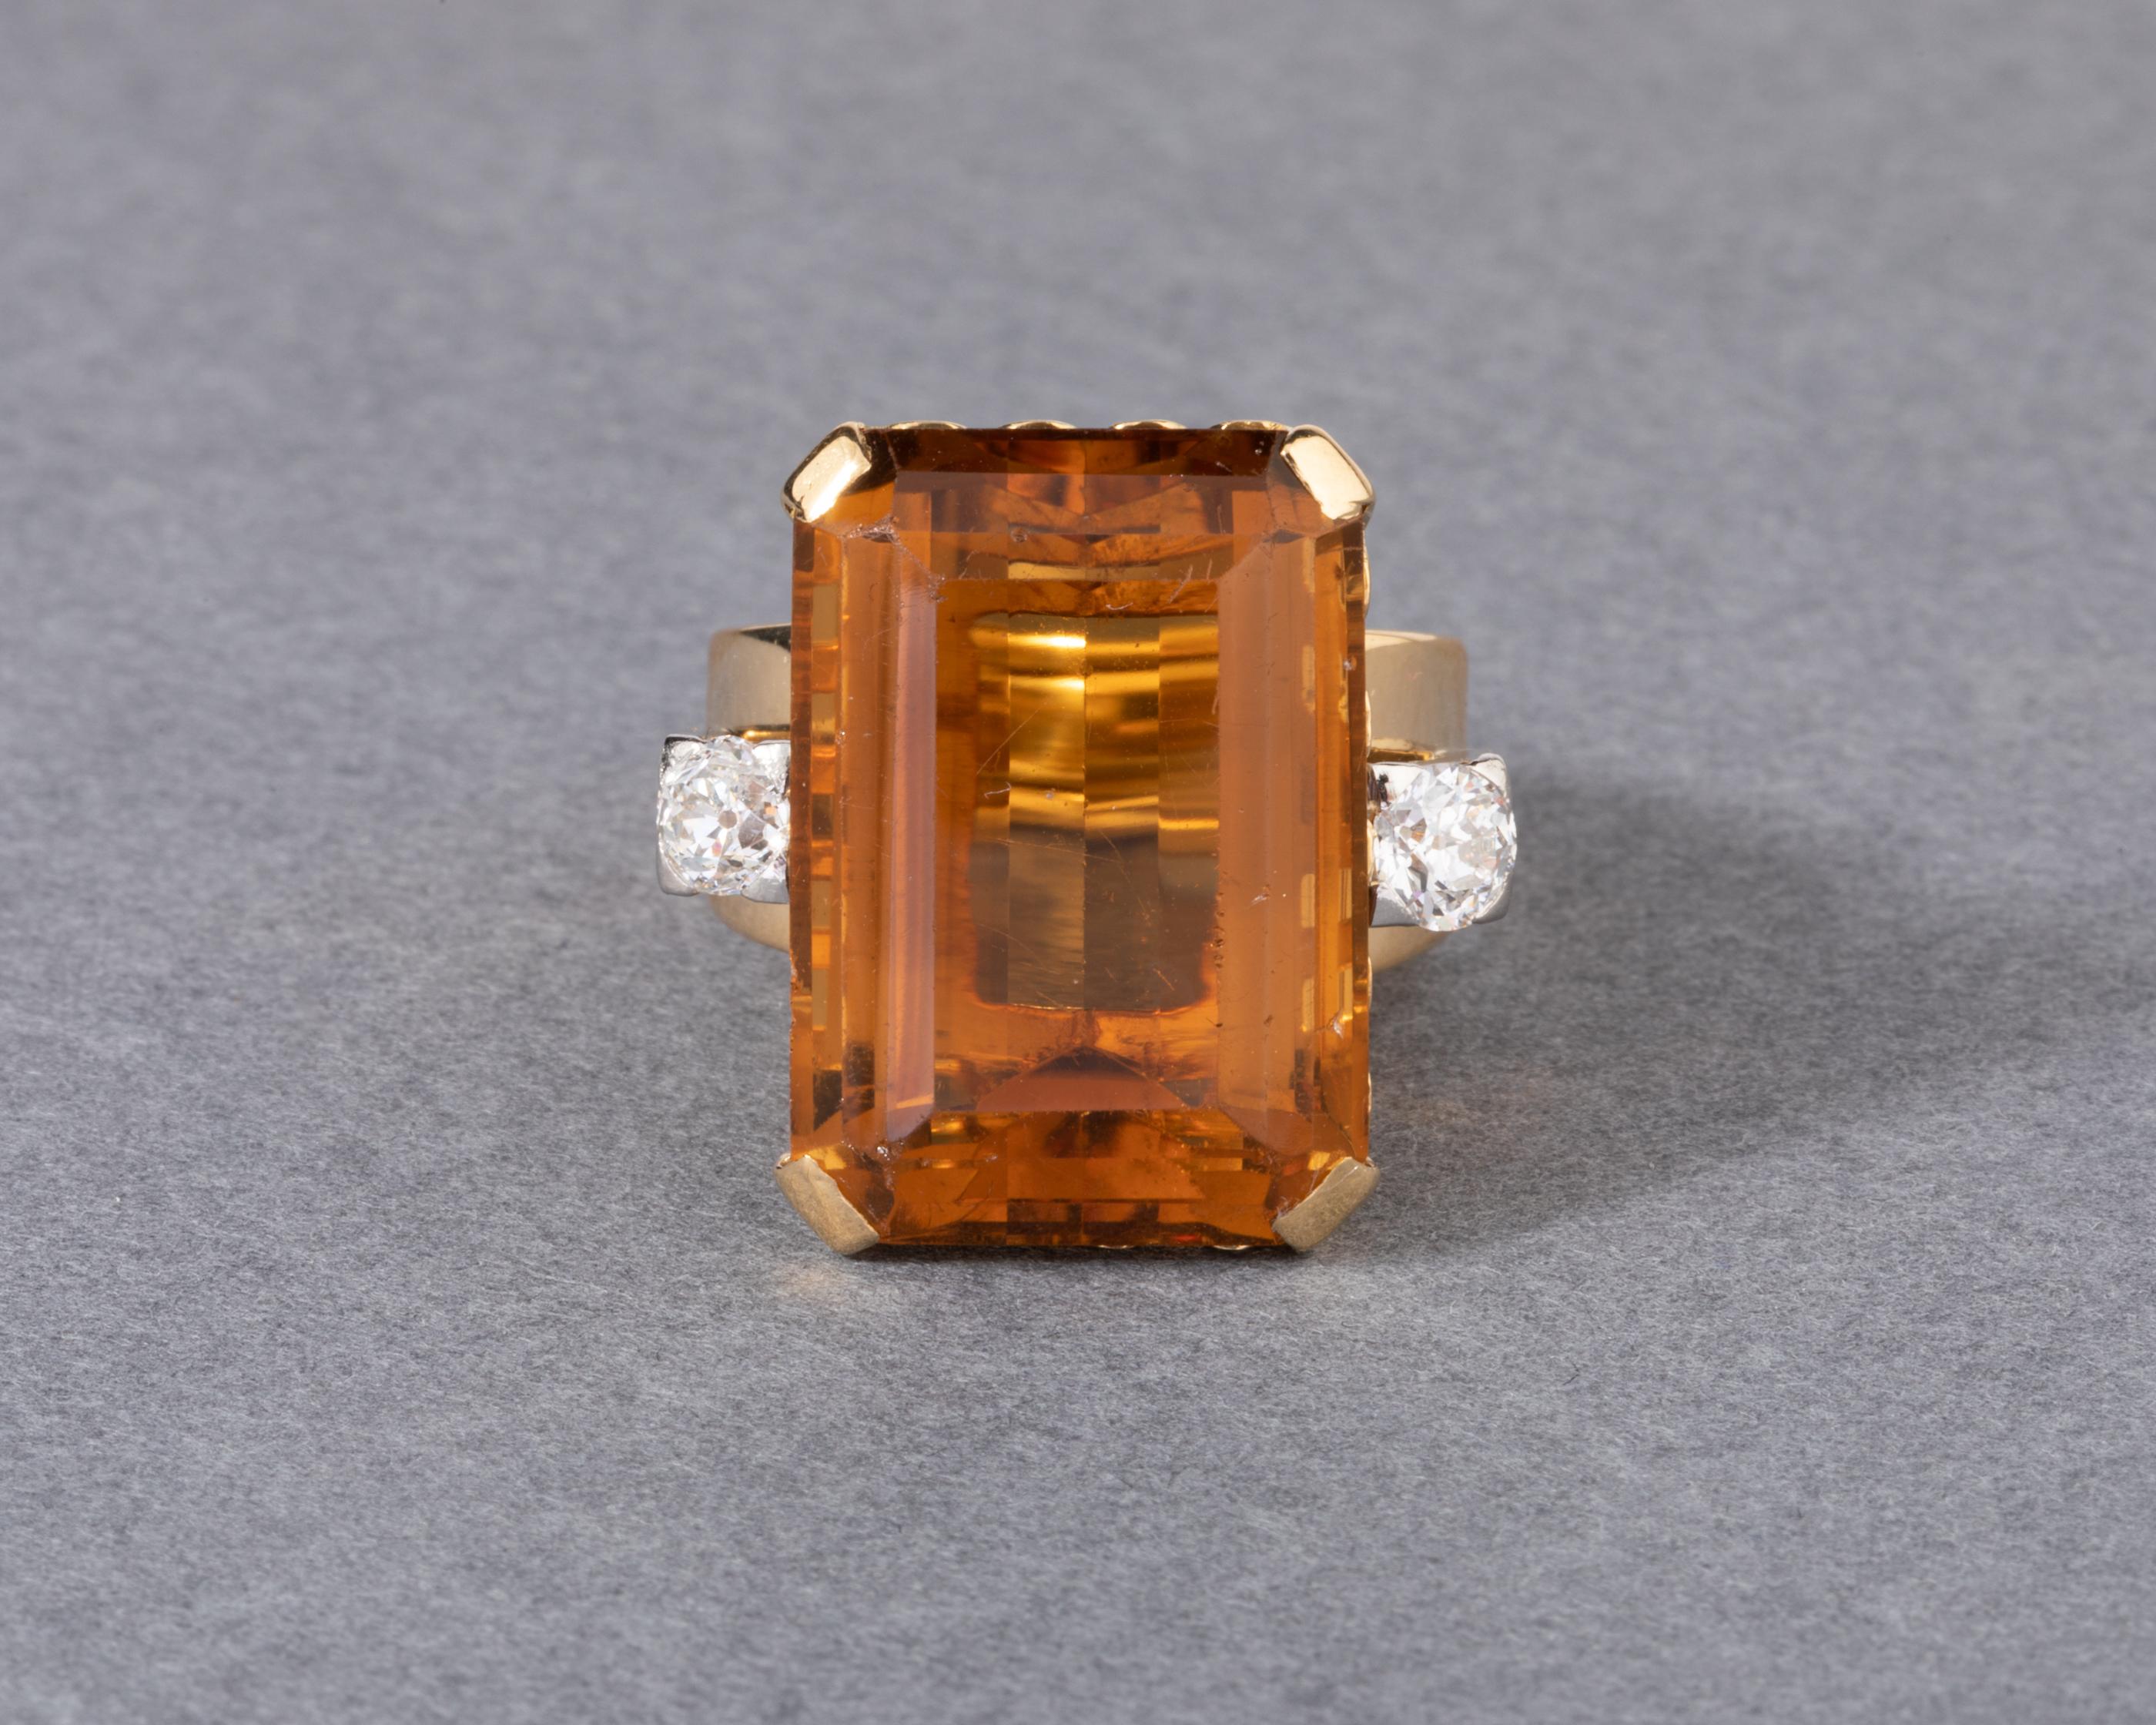 One lovely vintage ring, made in France circa 1955.
Made in yellow gold 18k (Owl Hallmark) and platinum (old man hallmark).
The citrine measures 20*14 mm, emerald cut.
The diamonds on the sides weights 0.20/0.25 each, round old cut.
Ring size is 52